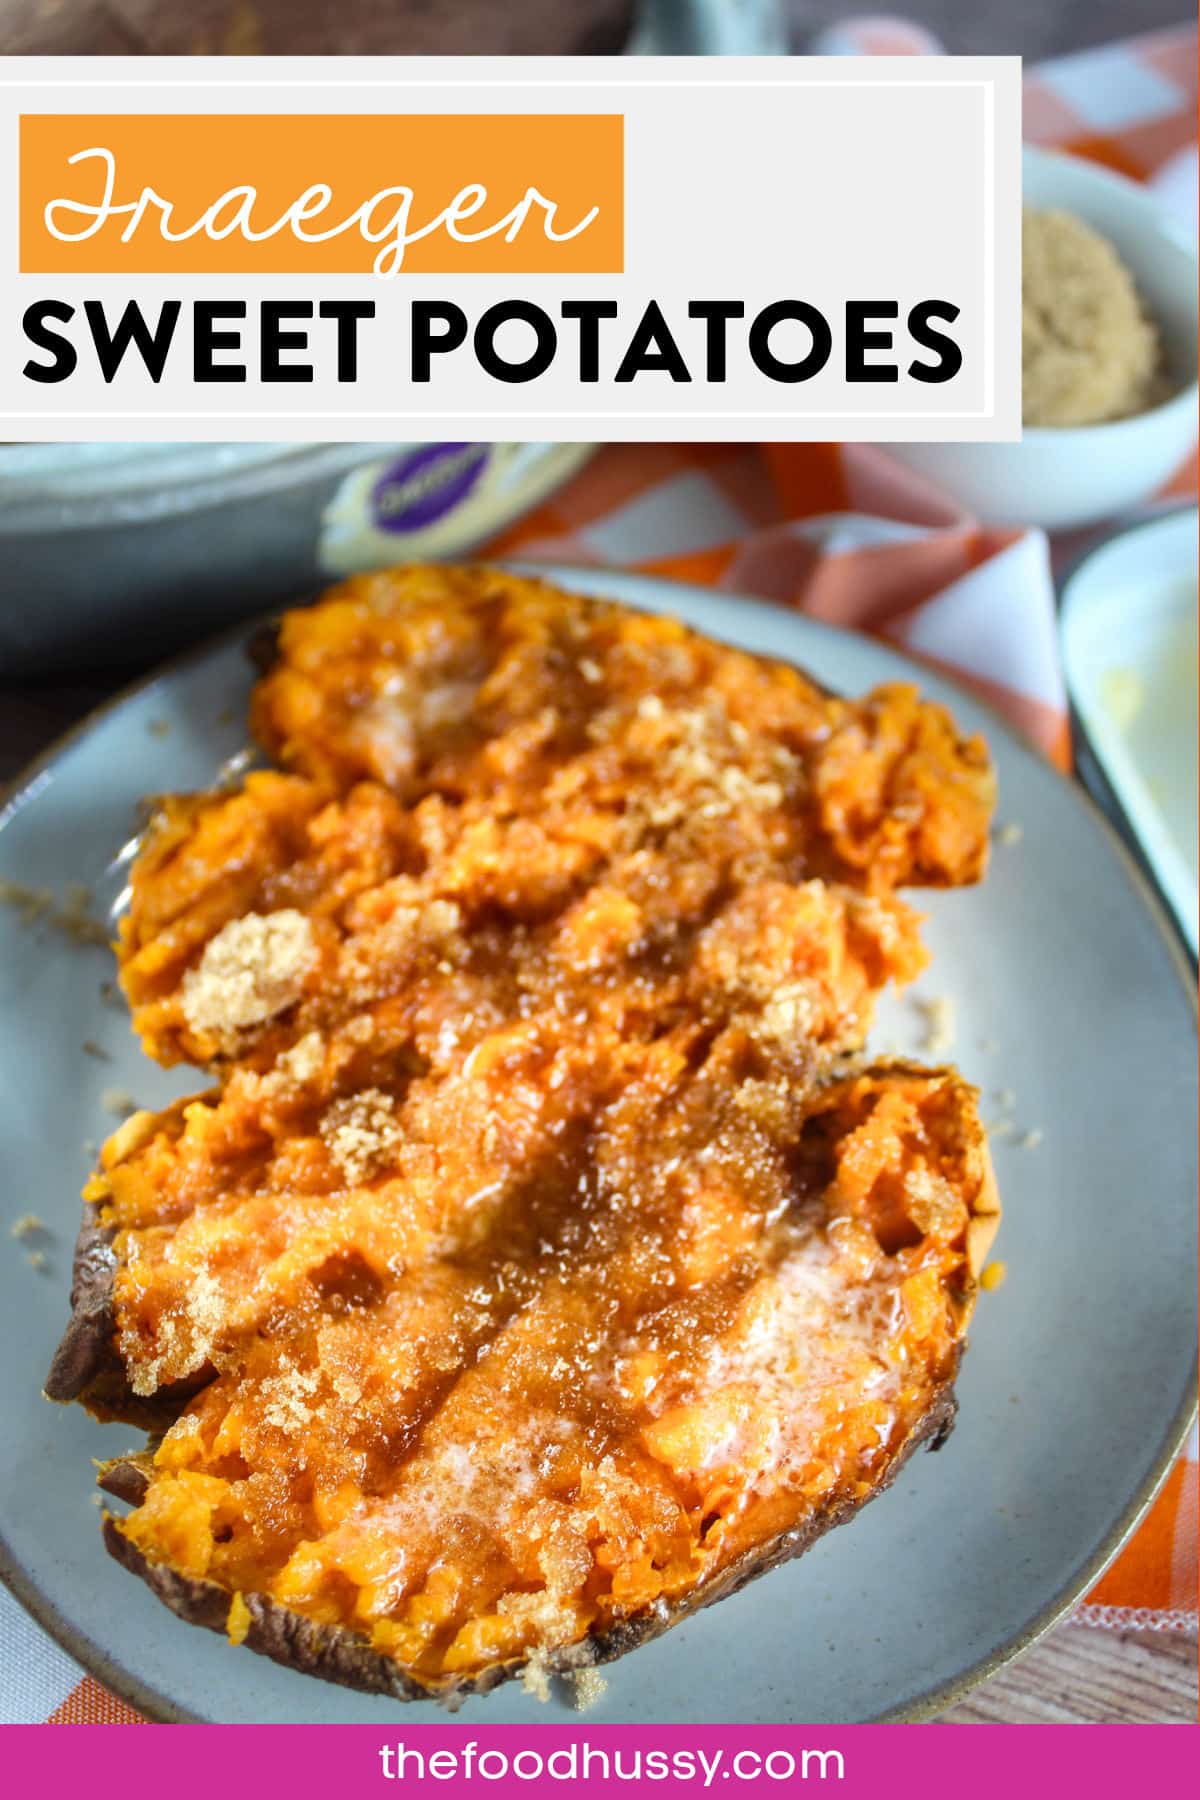 Traeger Sweet Potatoes are so delicious - that fluffy orange inside drenched in butter and brown sugar - with just a touch of smoky flavor! These taters are the perfect side dish for ribs, chicken and more! via @foodhussy